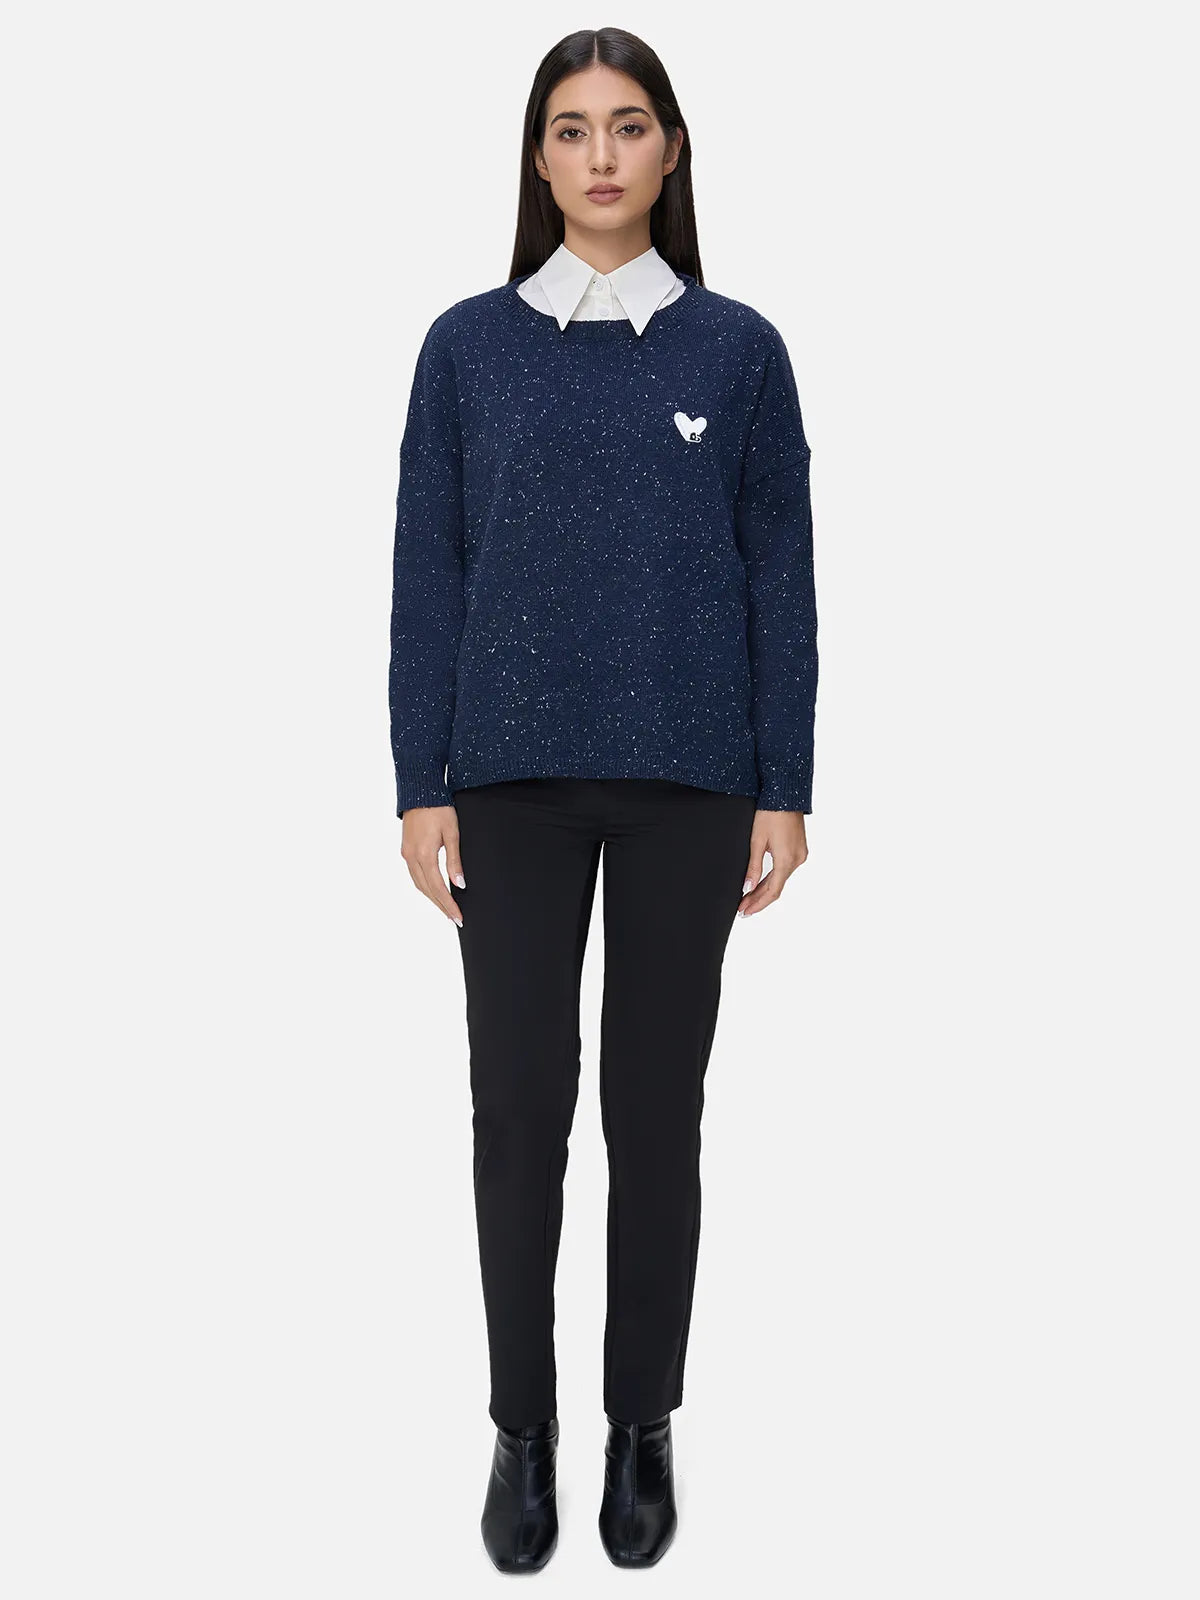 Make a style statement with this stylish navy sweater set, complemented by a white shirt adorned with playful polka dot decorations, creating a fashionable and cute ensemble.